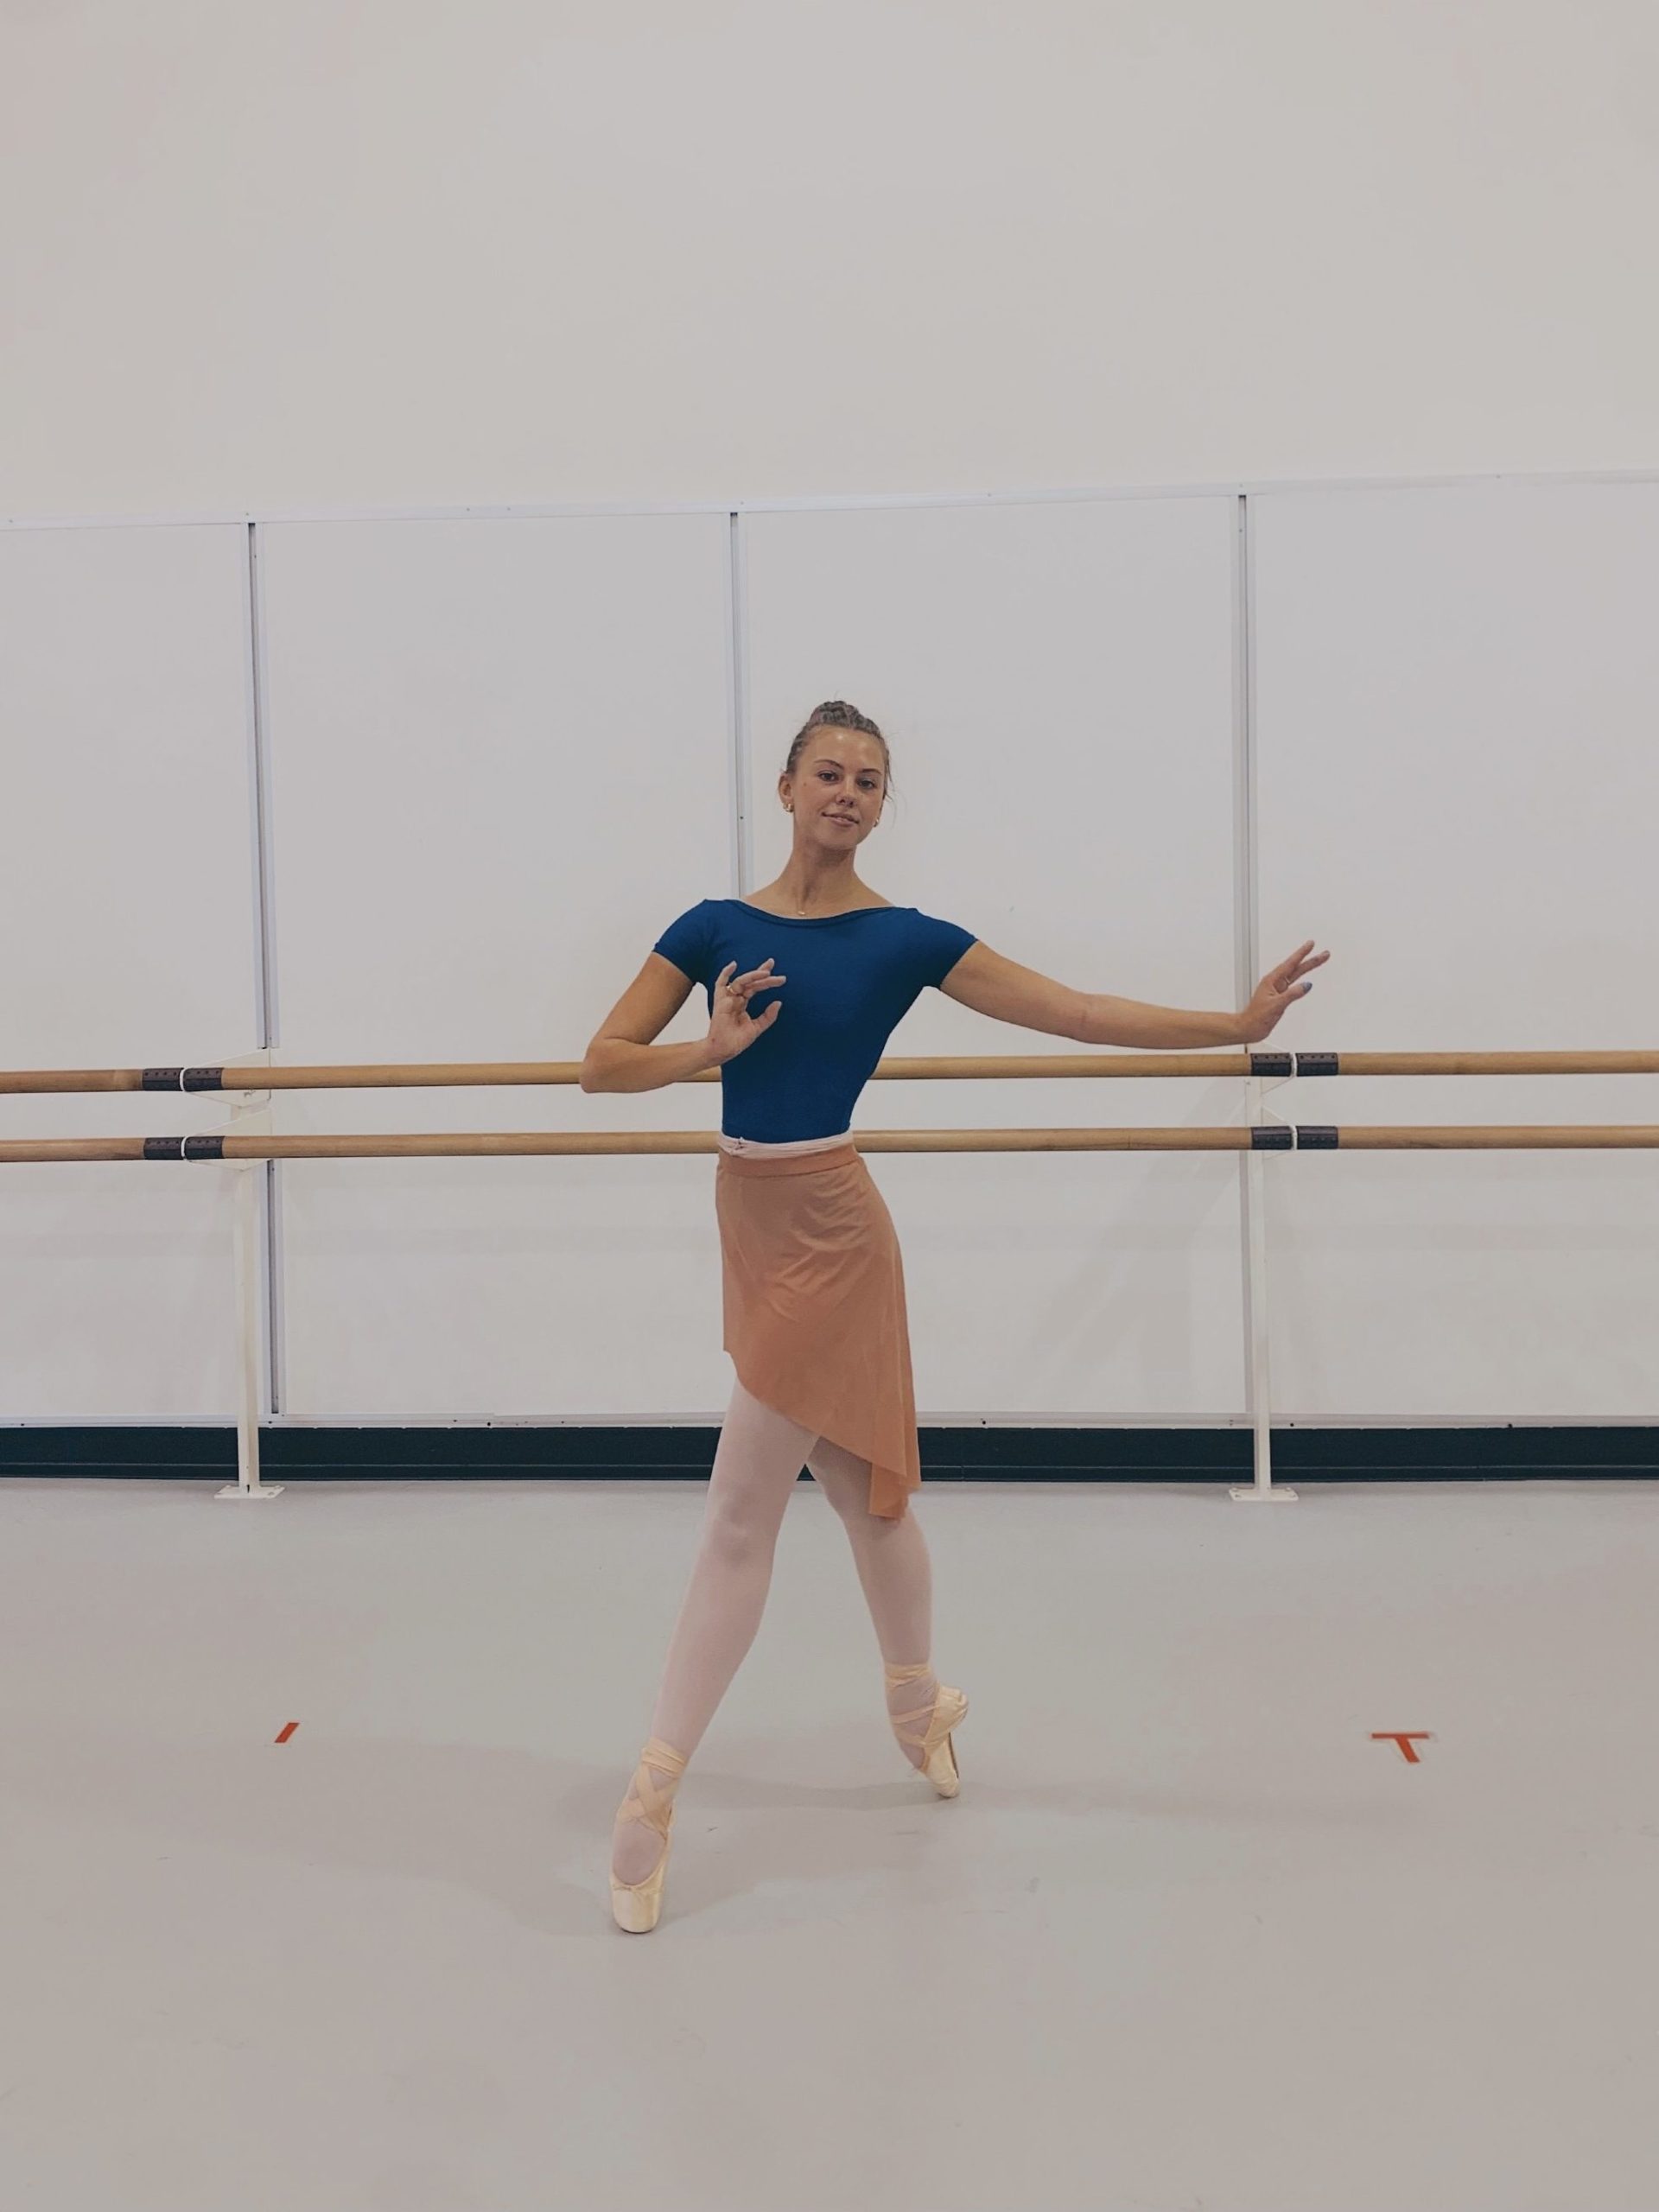 dancer in blue leotard, pink wrap skirt and pointe shoes